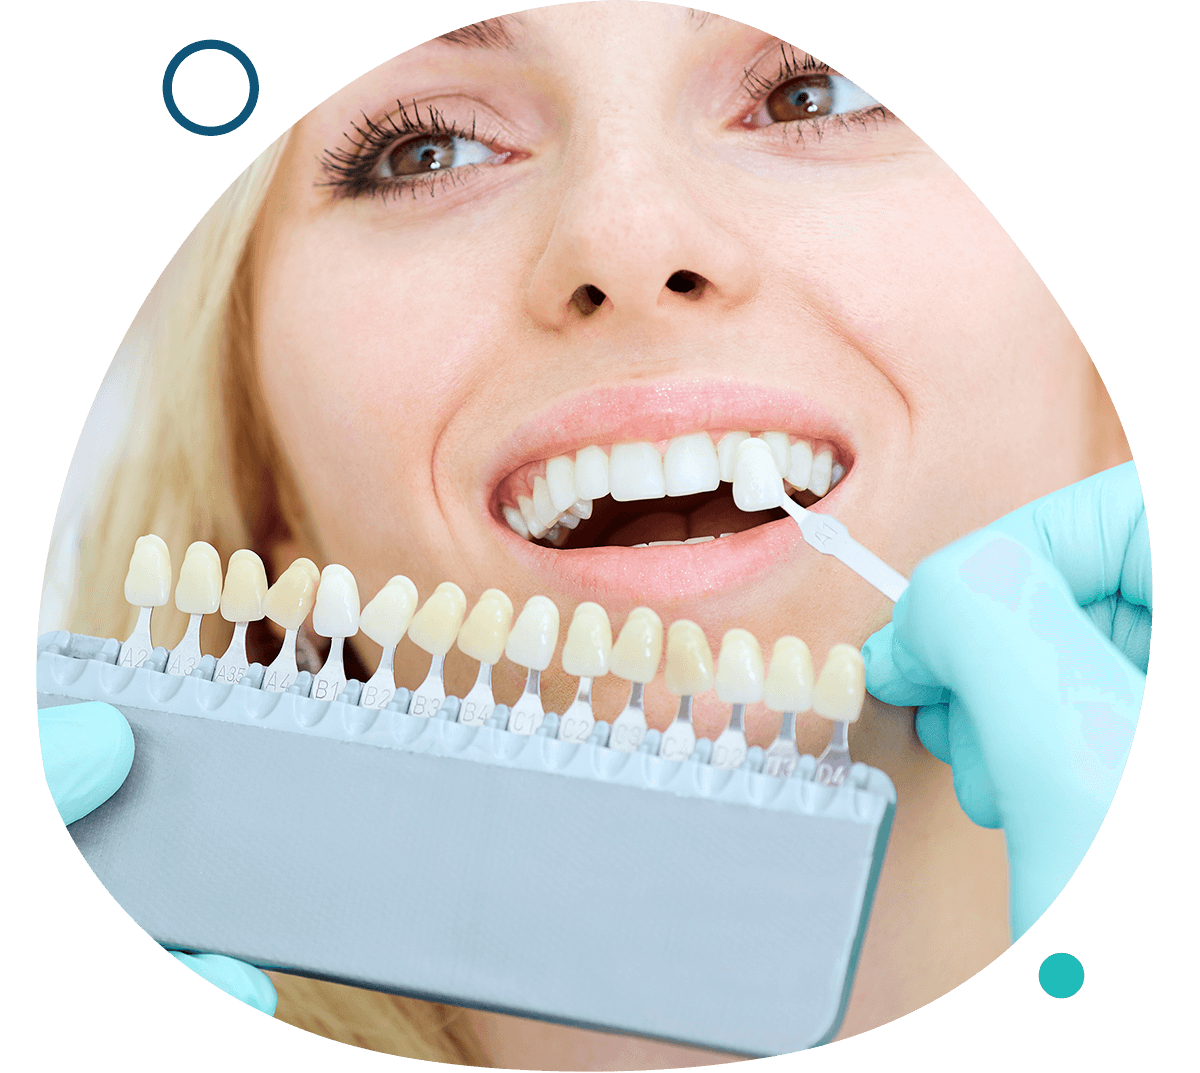 https://aridentistry.ca/wp-content/uploads/2020/01/home-service-4-1.png